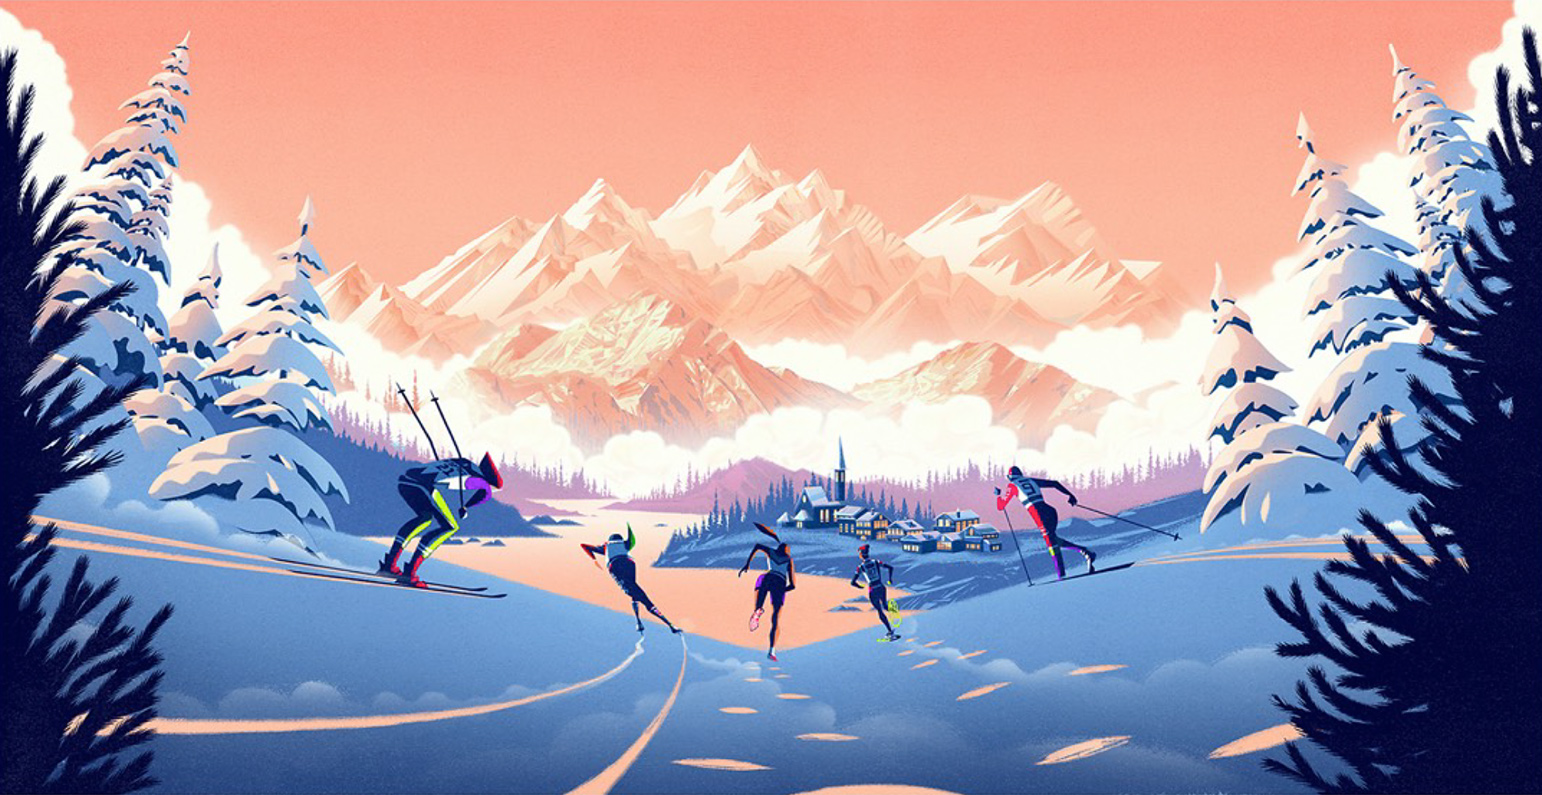 cross-country skiing, ice skating and ski slope in a snowy landscape